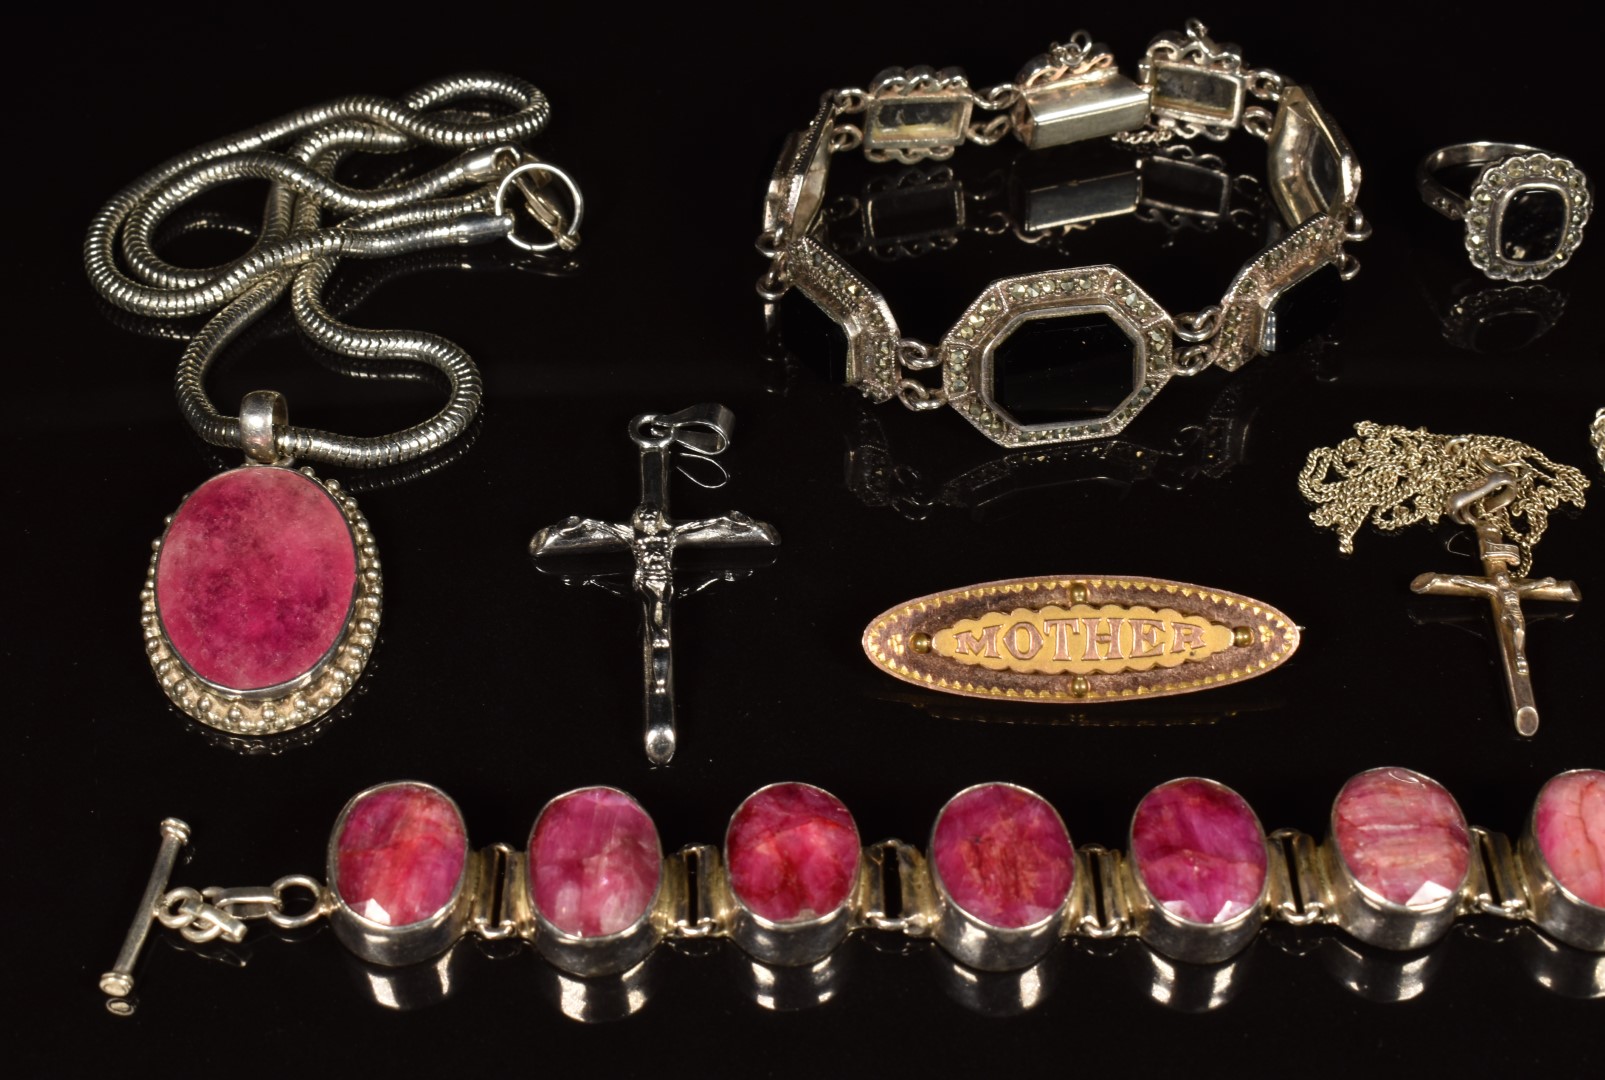 A silver bracelet set with rubies, a silver bracelet set with onyx, silver pendants and chains, - Image 2 of 3